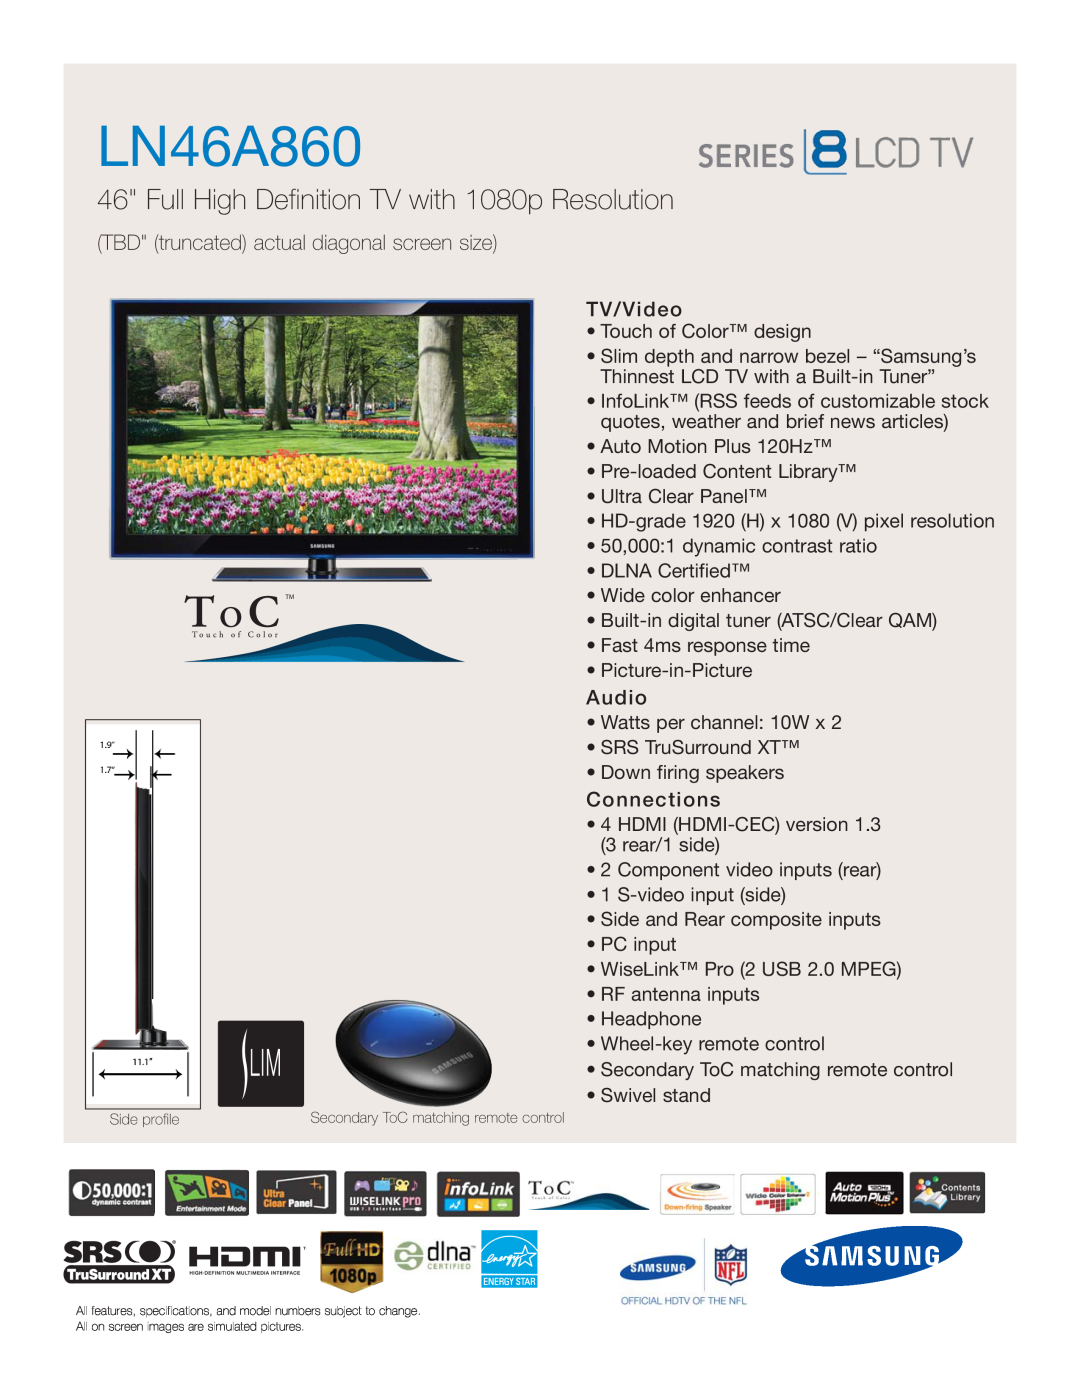 Samsung LN46A860 specifications Full High Definition TV with 1080p Resolution, TBD truncated actual diagonal screen size 